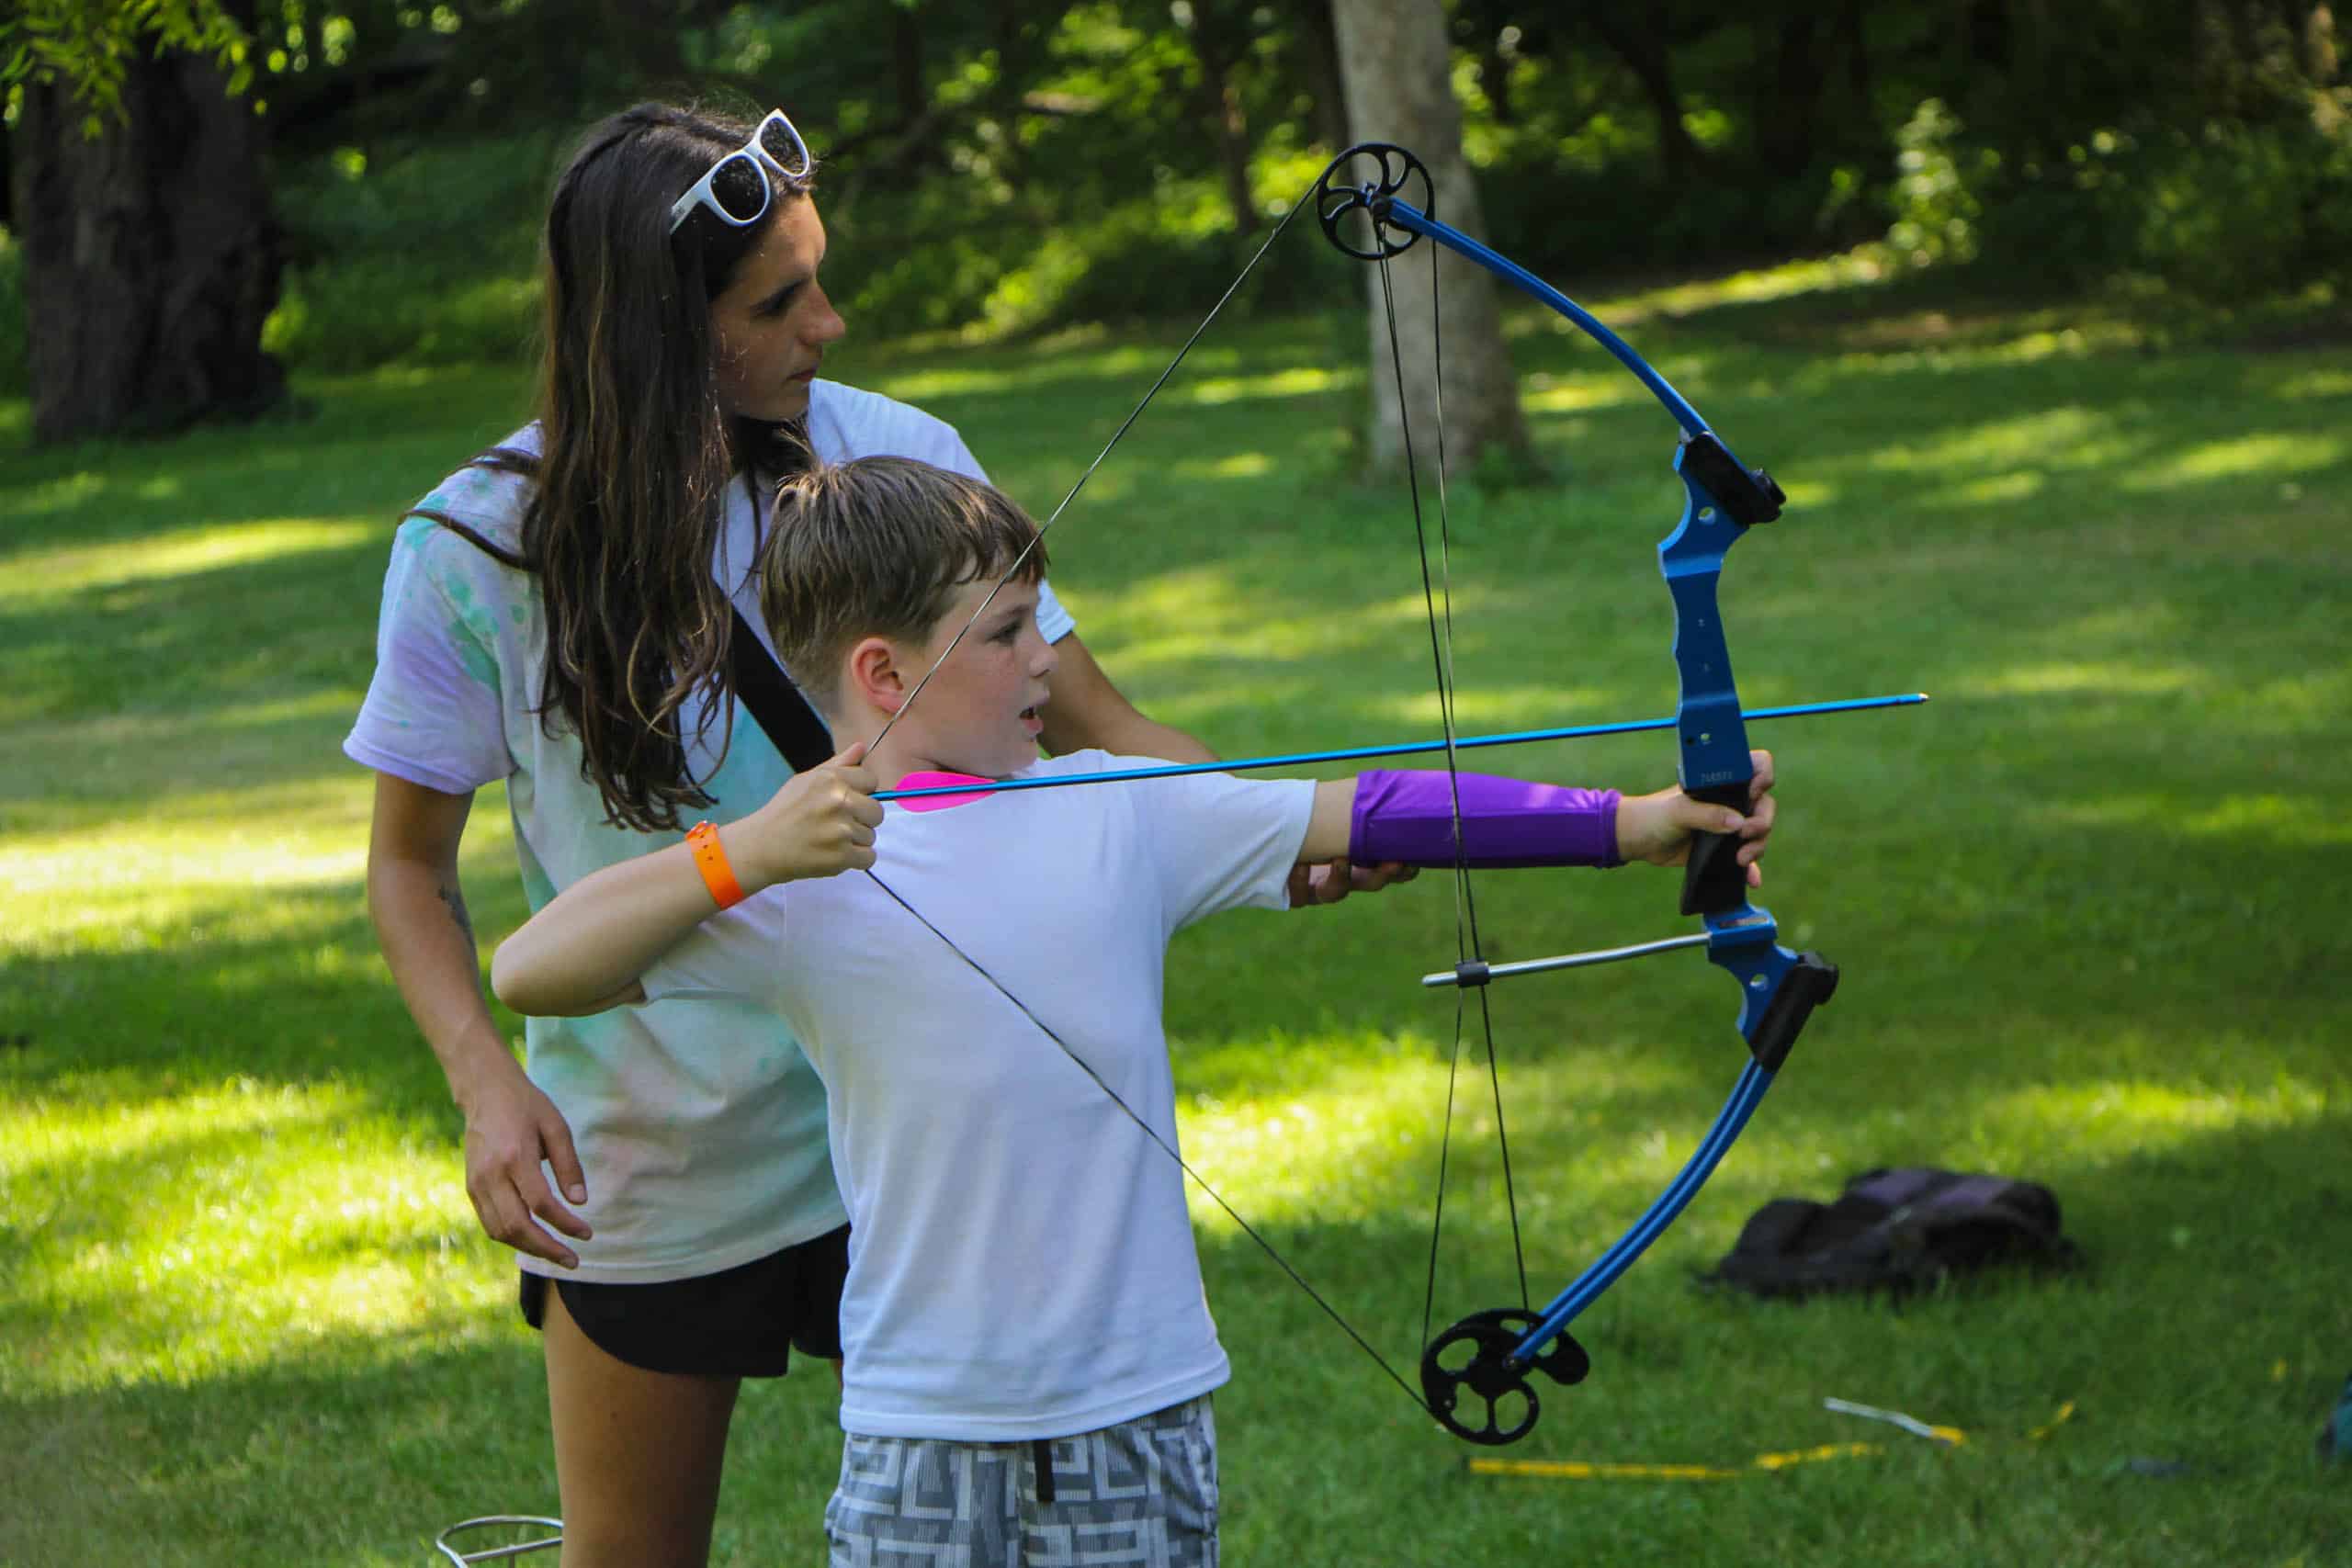 A young boy at an Iowa summer camp learning to use a bow and arrow.